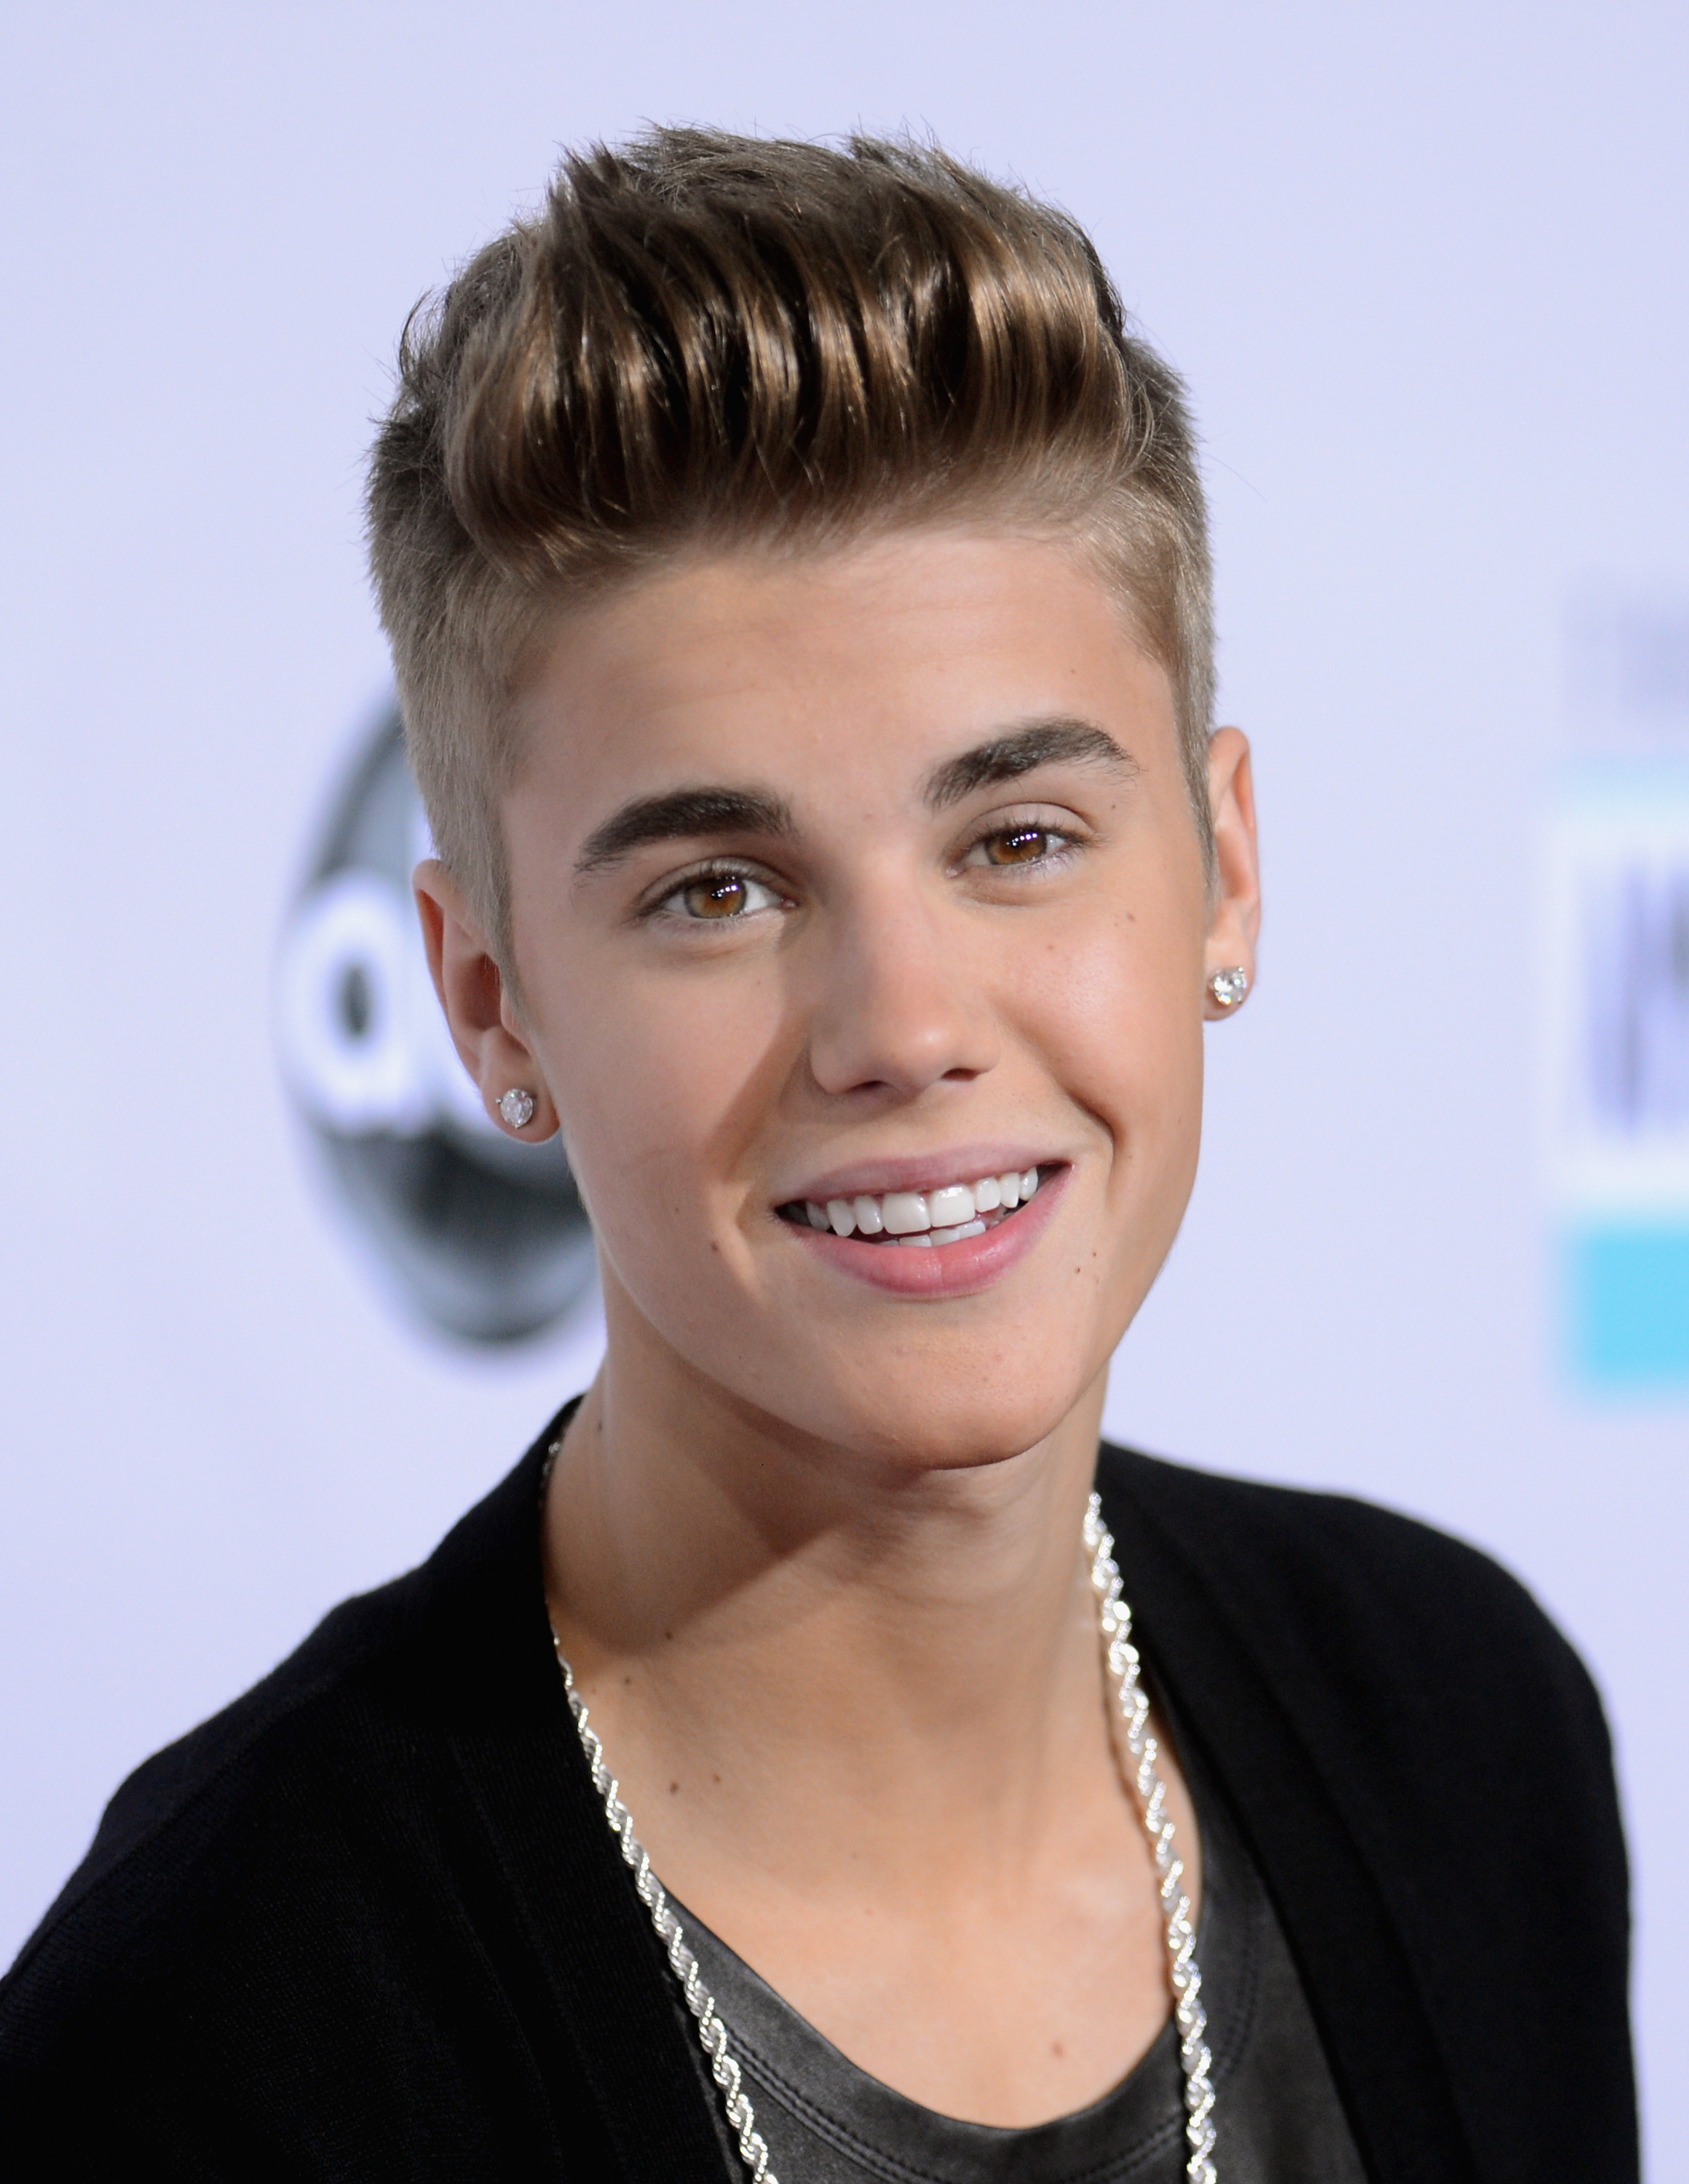 Justin Bieber photo gallery - high quality pics of Justin Bieber | ThePlace2320 x 3000